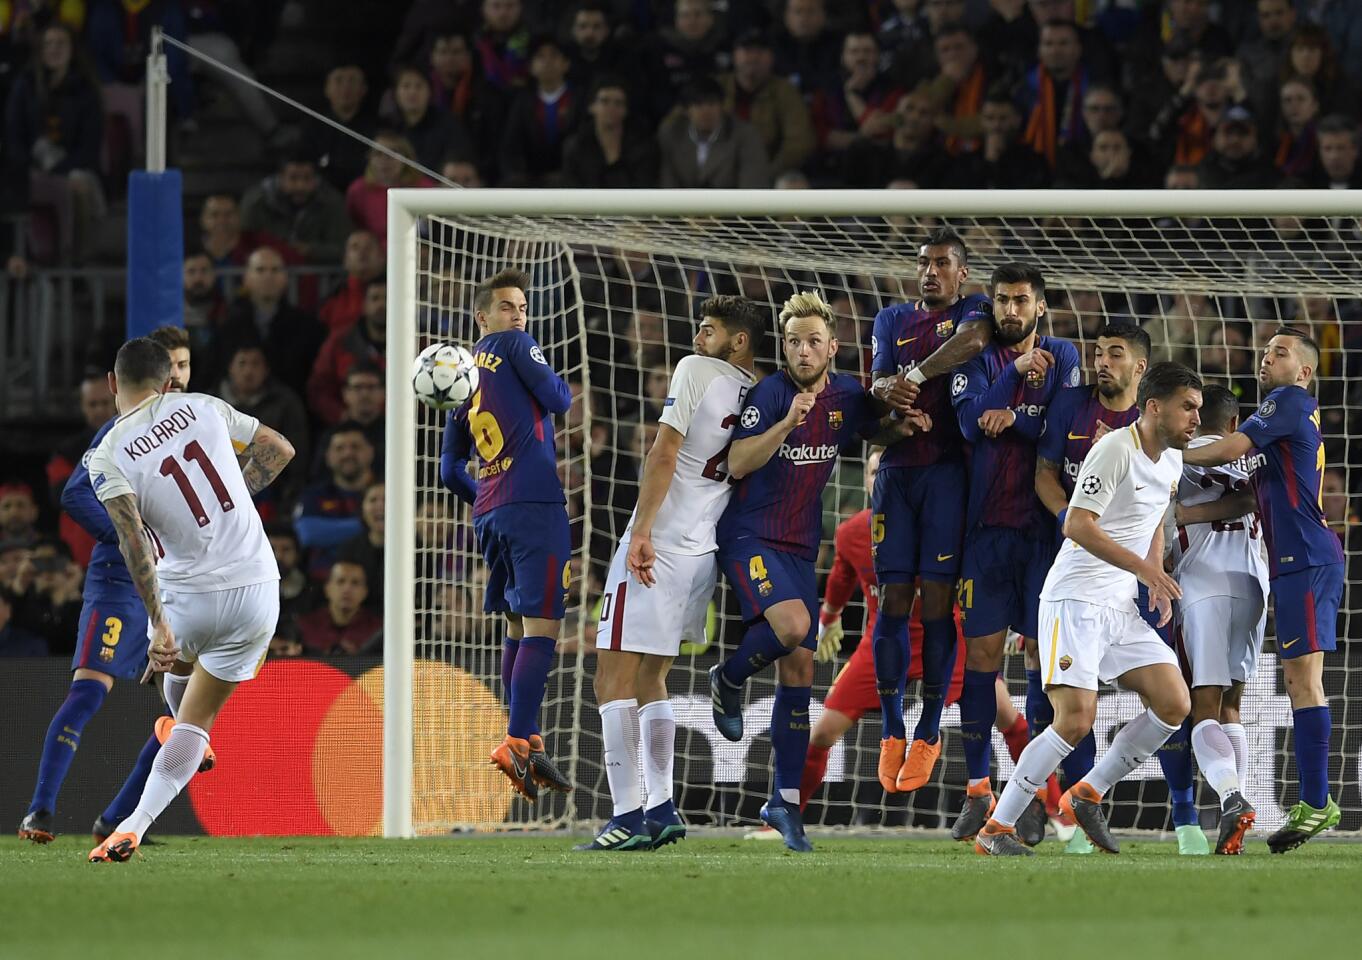 Roma's Serbian defender Aleksandar Kolarov (L) shoots against Barcelona's wall during the UEFA Champions League quarter-final first leg football match between FC Barcelona and AS Roma at the Camp Nou Stadium in Barcelona on April 4, 2018. / AFP PHOTO / LLUIS GENELLUIS GENE/AFP/Getty Images ** OUTS - ELSENT, FPG, CM - OUTS * NM, PH, VA if sourced by CT, LA or MoD **